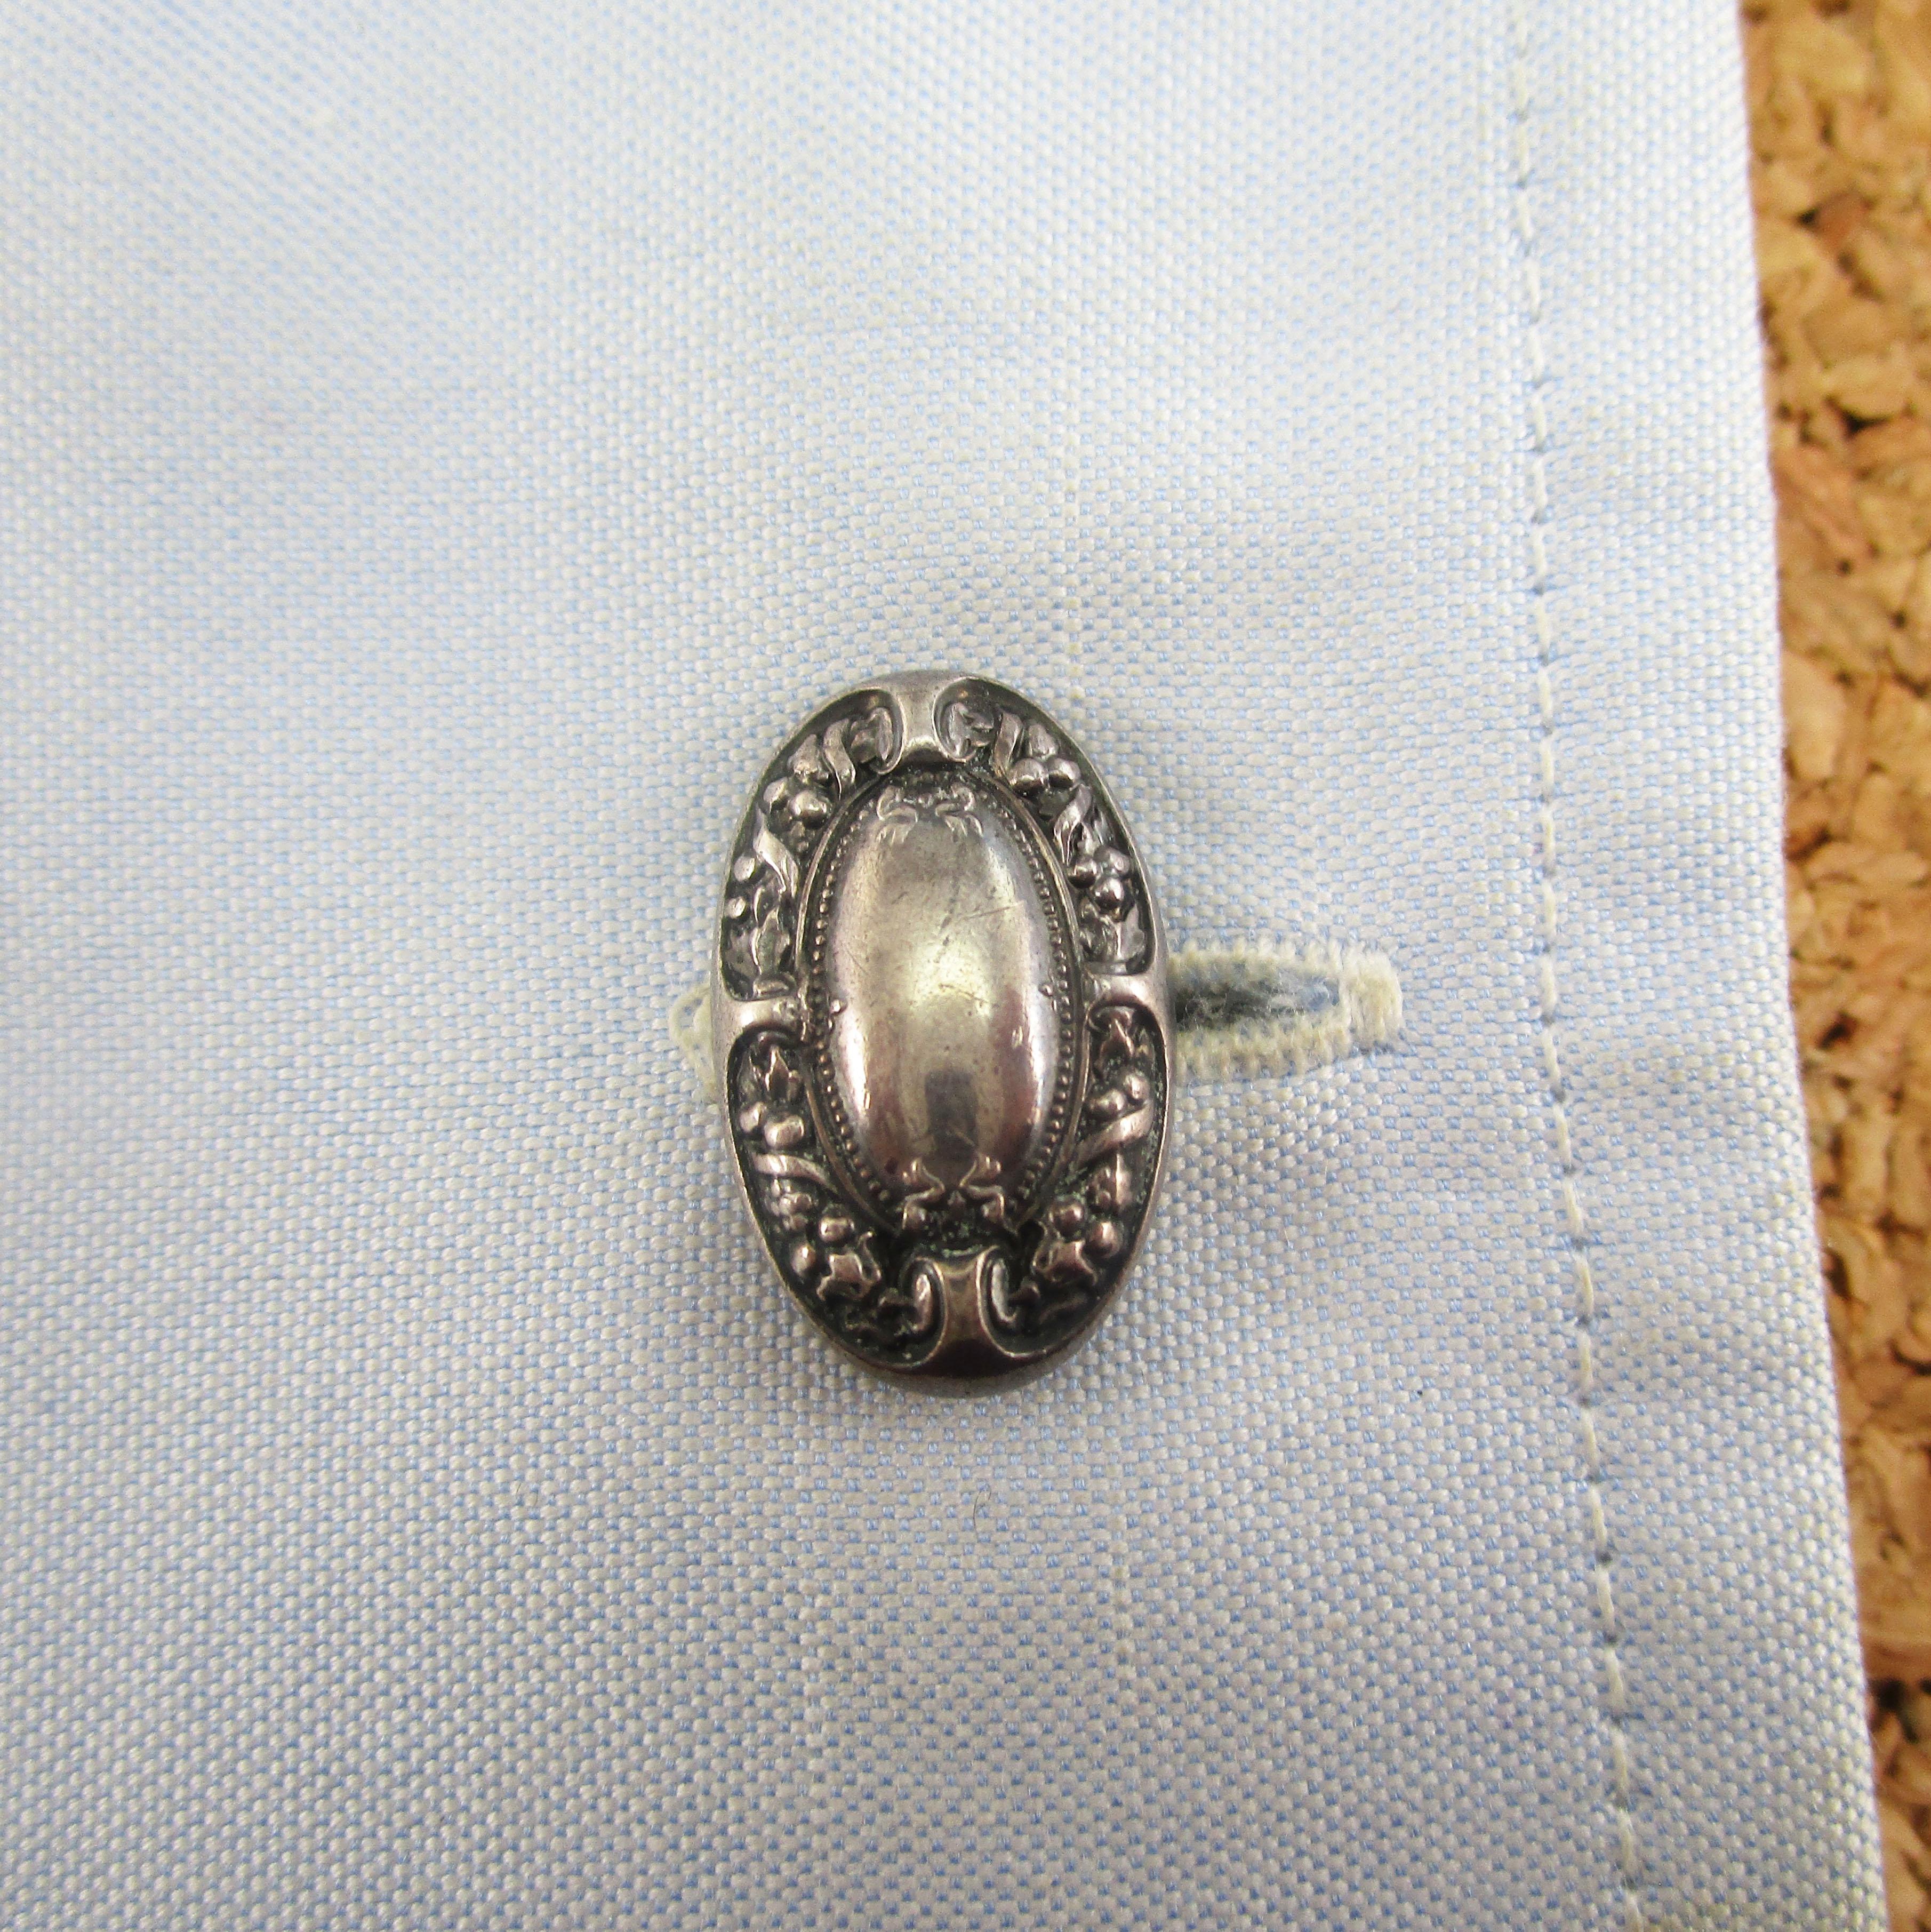 1869 Gorham Sterling Silver Cufflinks In Good Condition For Sale In Lexington, KY